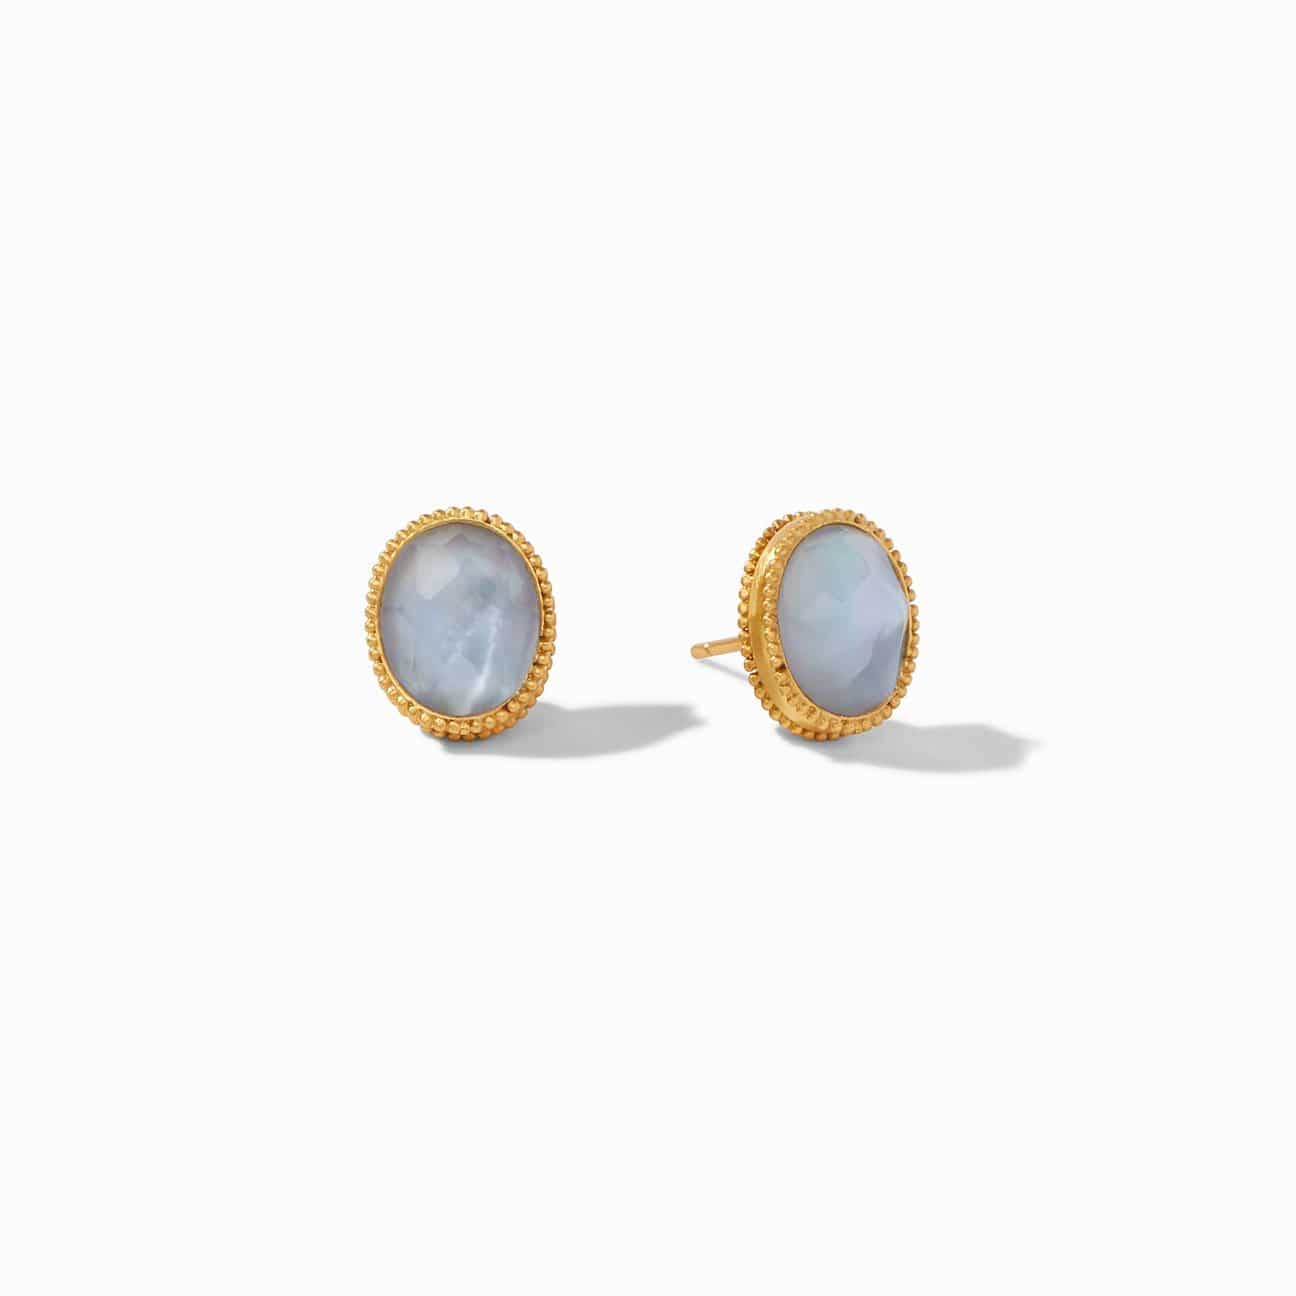 Julie Vos - Julie Vos Verona Stud Earrings with Iridescent Ice Blue Stones - Little Miss Muffin Children & Home